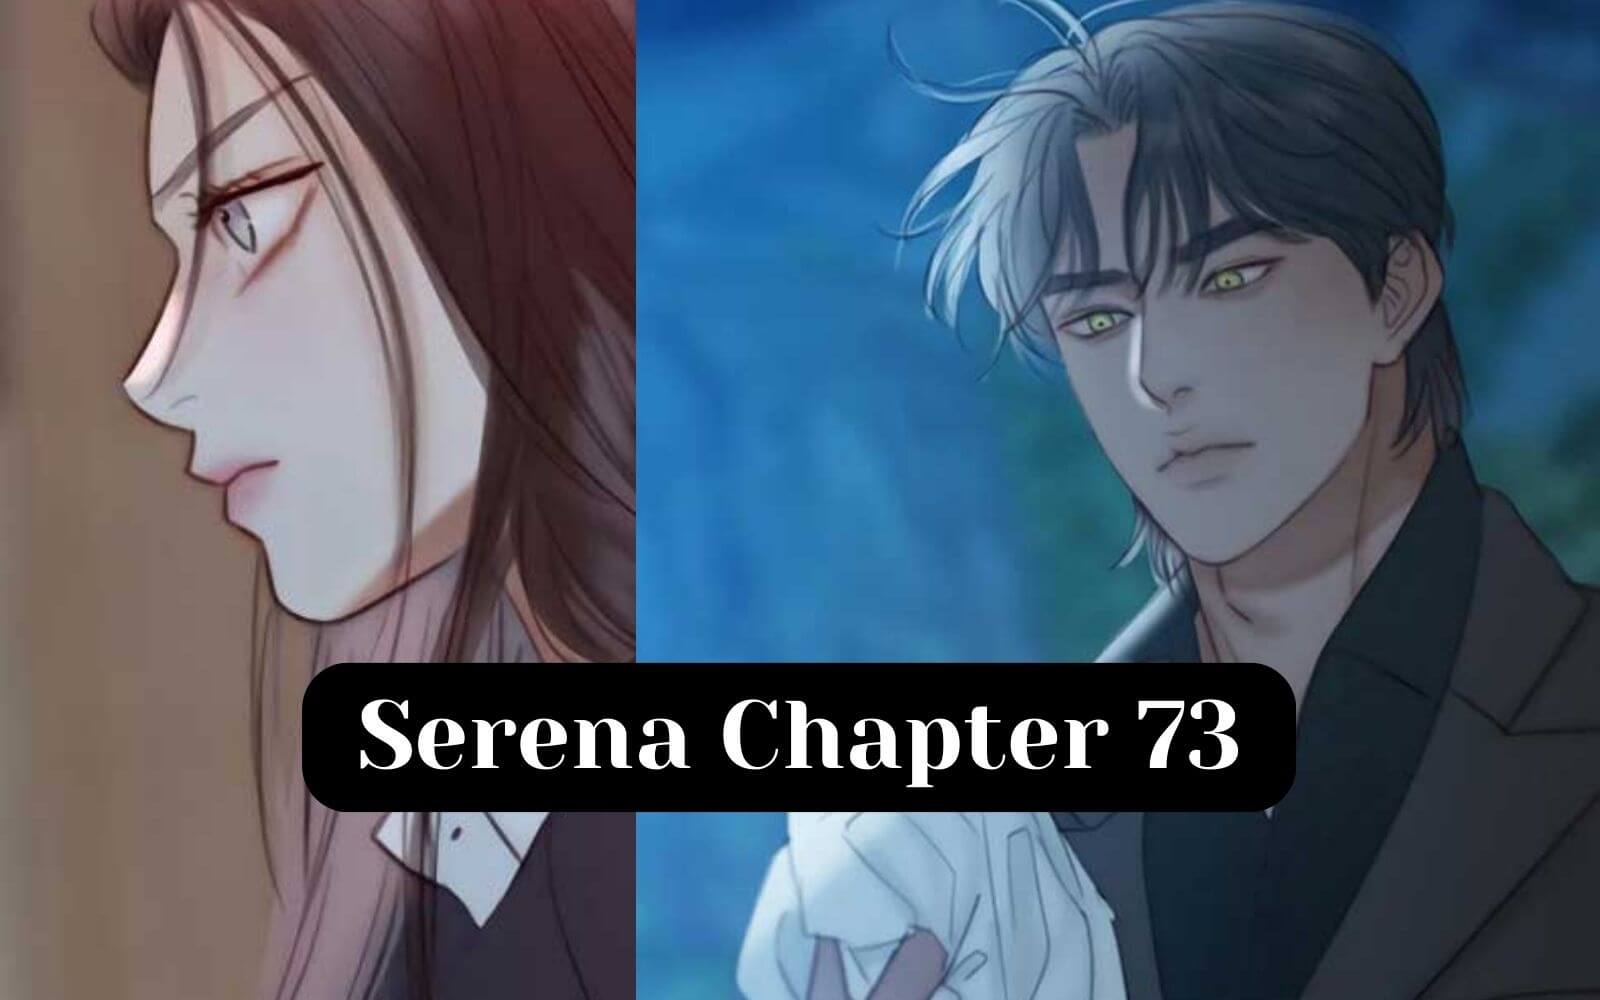 Serena Chapter 73 release